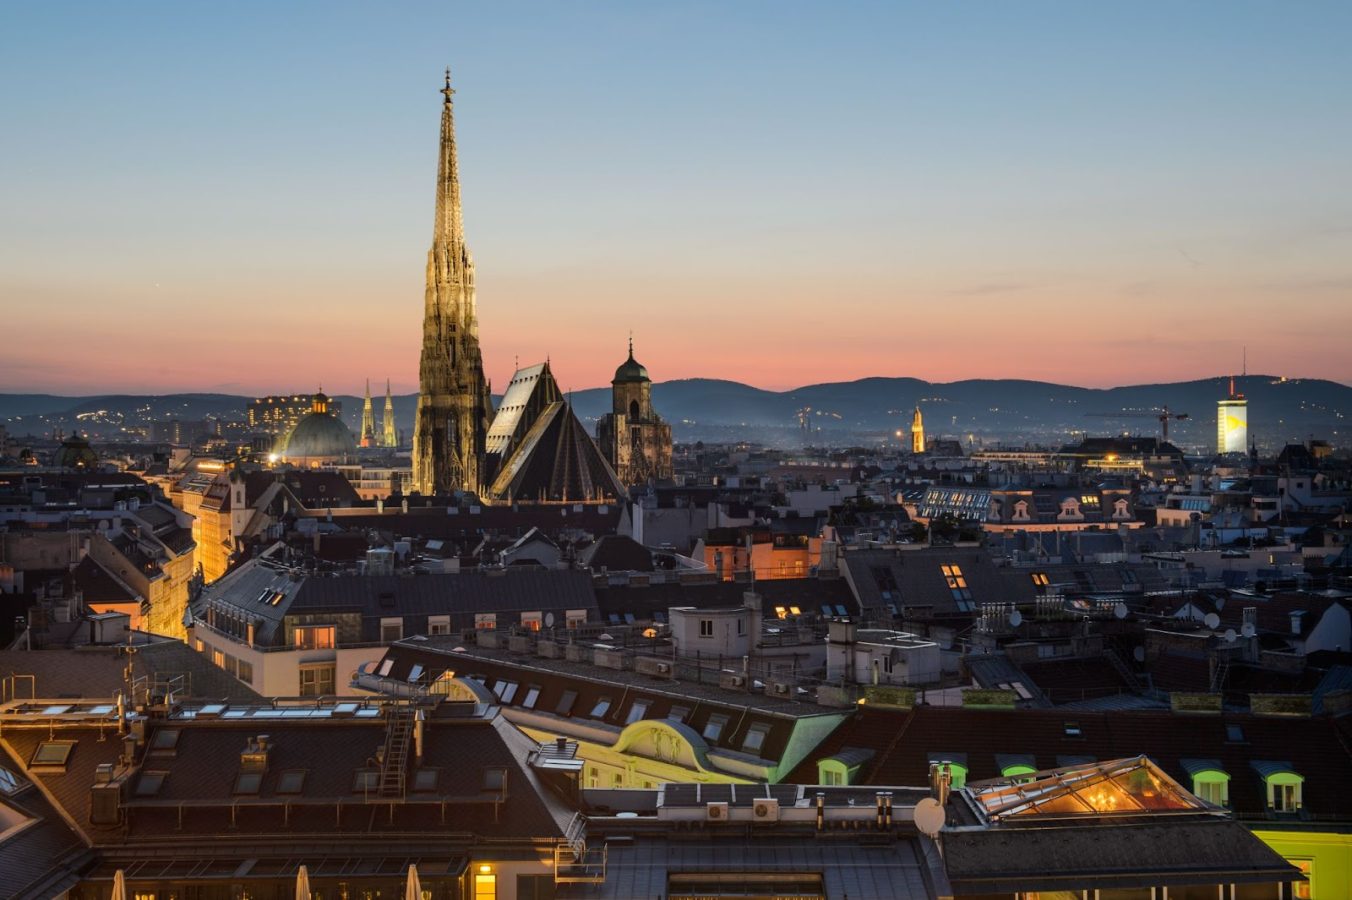 Skyline of Vienna, Austria - the destination to travel to for Psychology majors.